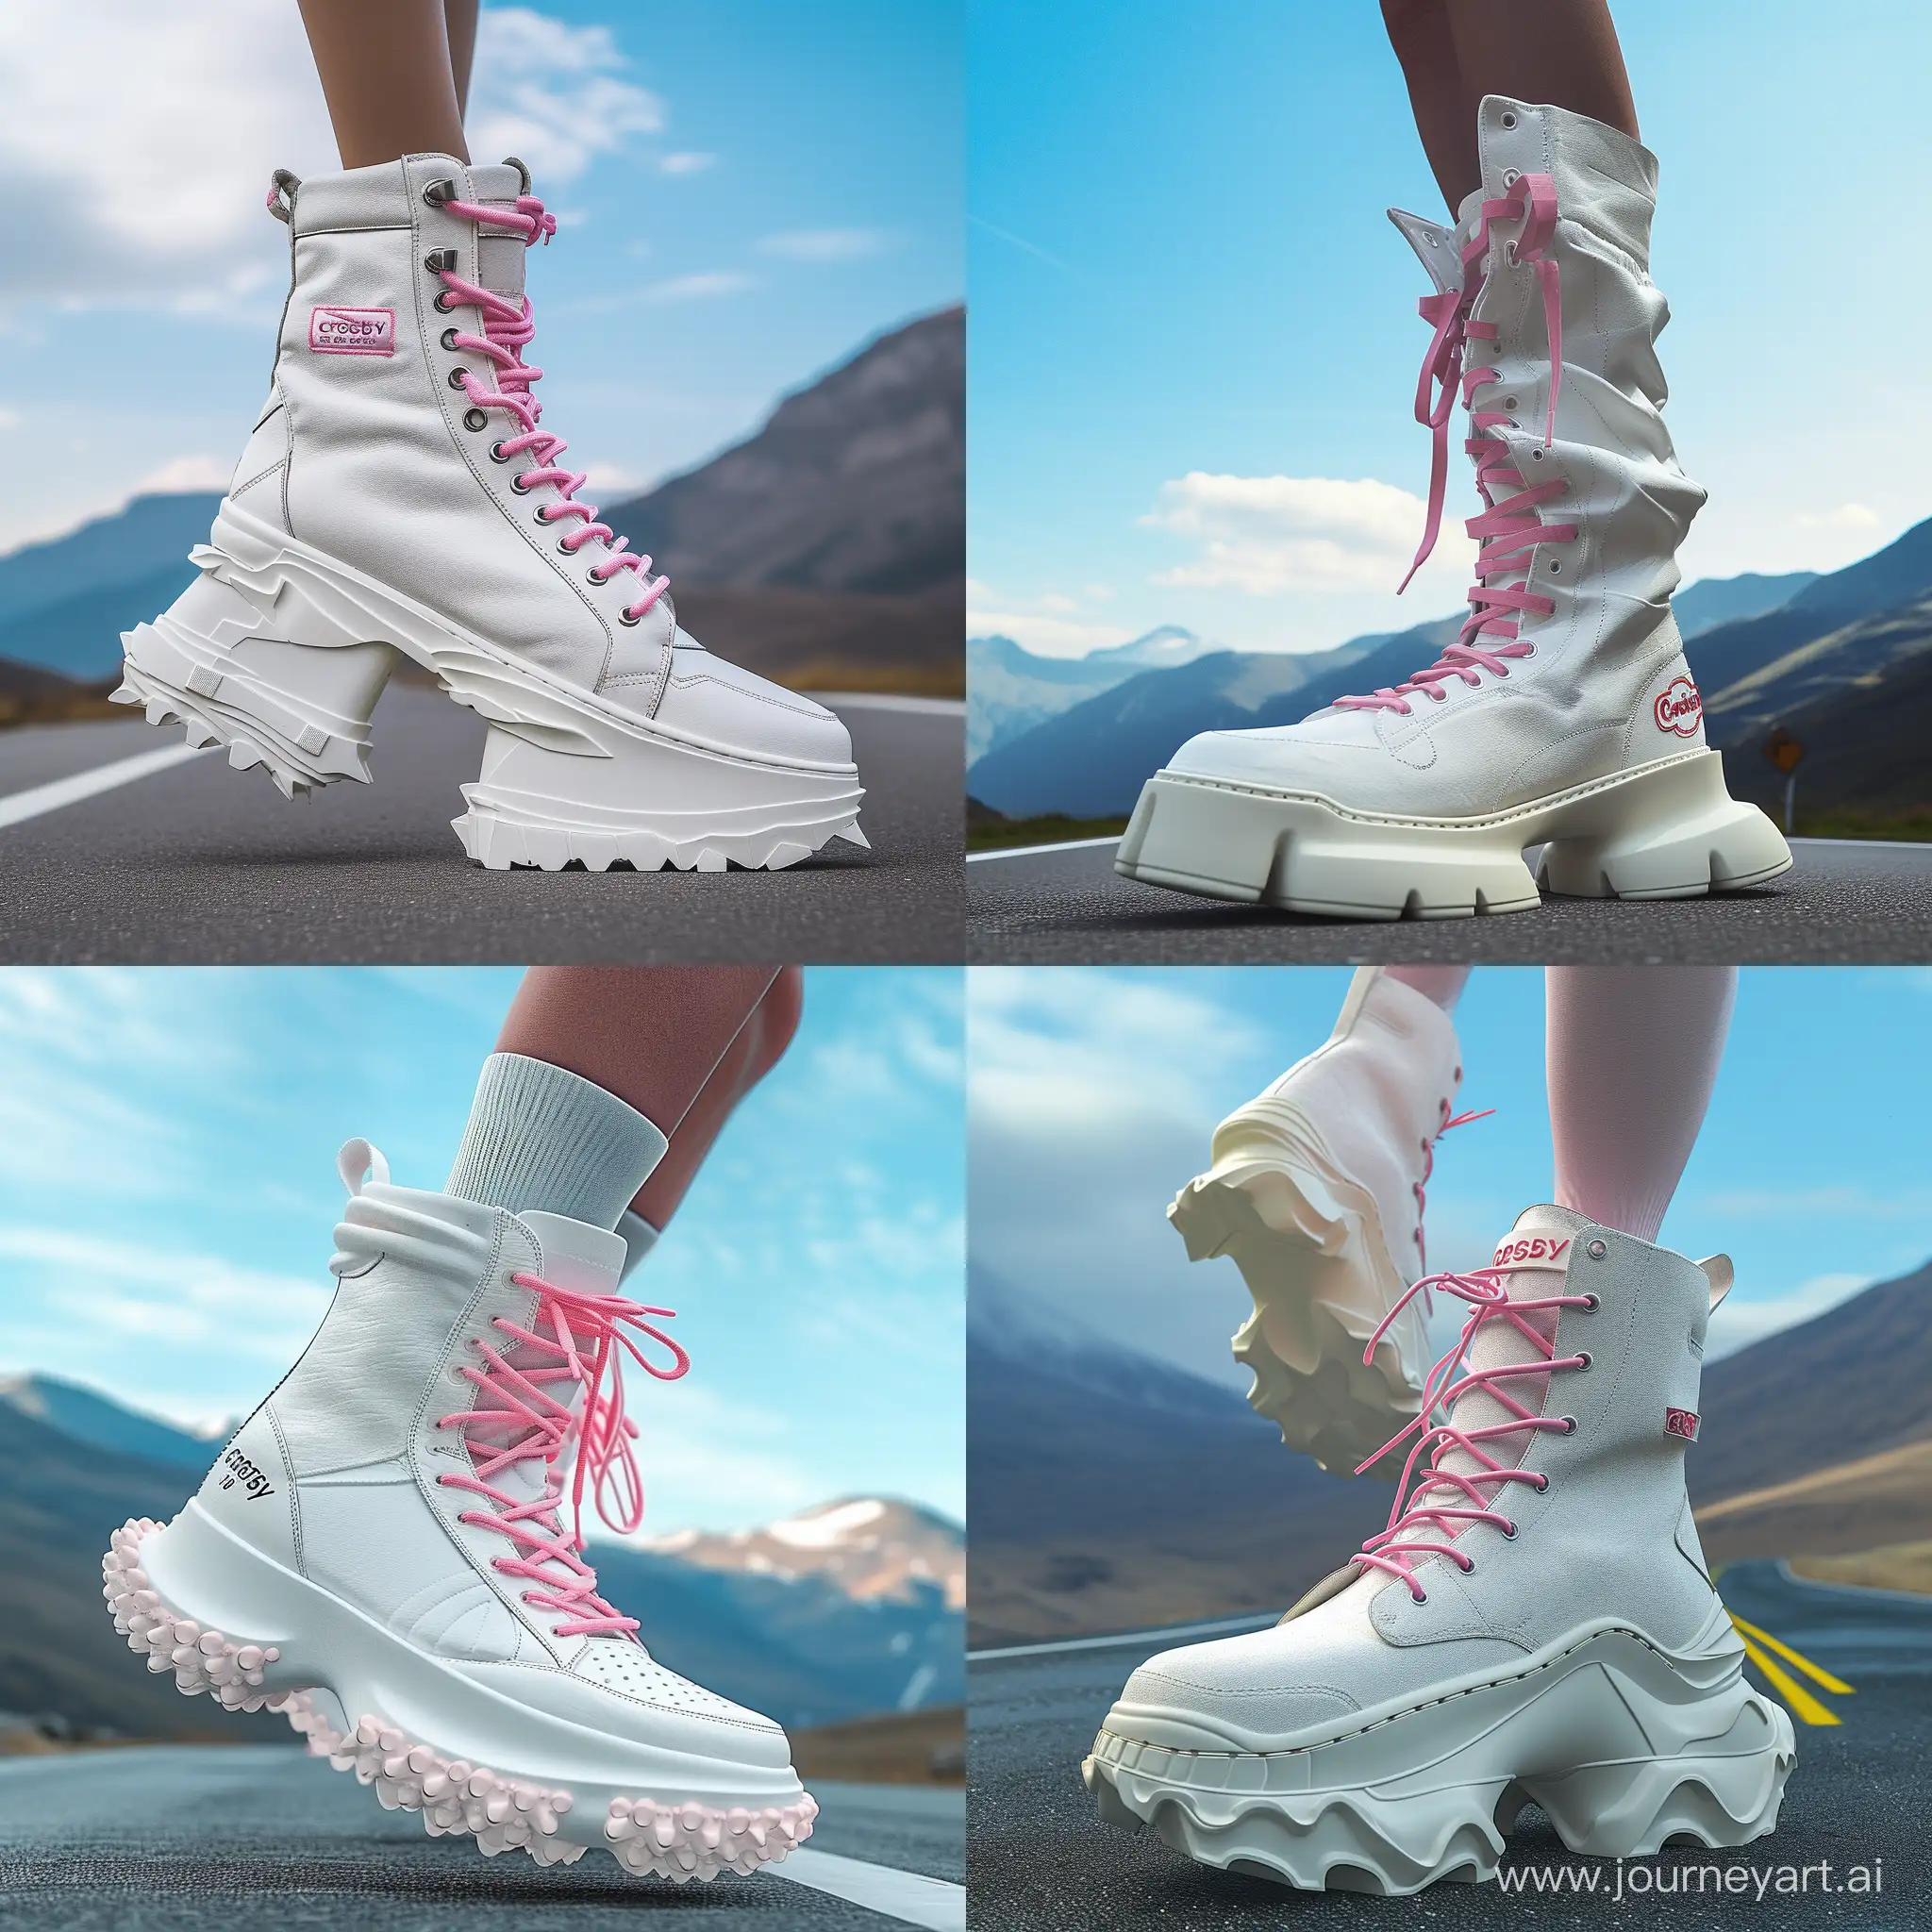 white urban sneakers with massive soles, pink laces, against the background of mountains, hyper-exaggerated, without legs, one in the air, the other standing sideways, on the road, professional photo, crosby logo, beautiful, realistic, high resolution, high detail, realistic, f/19